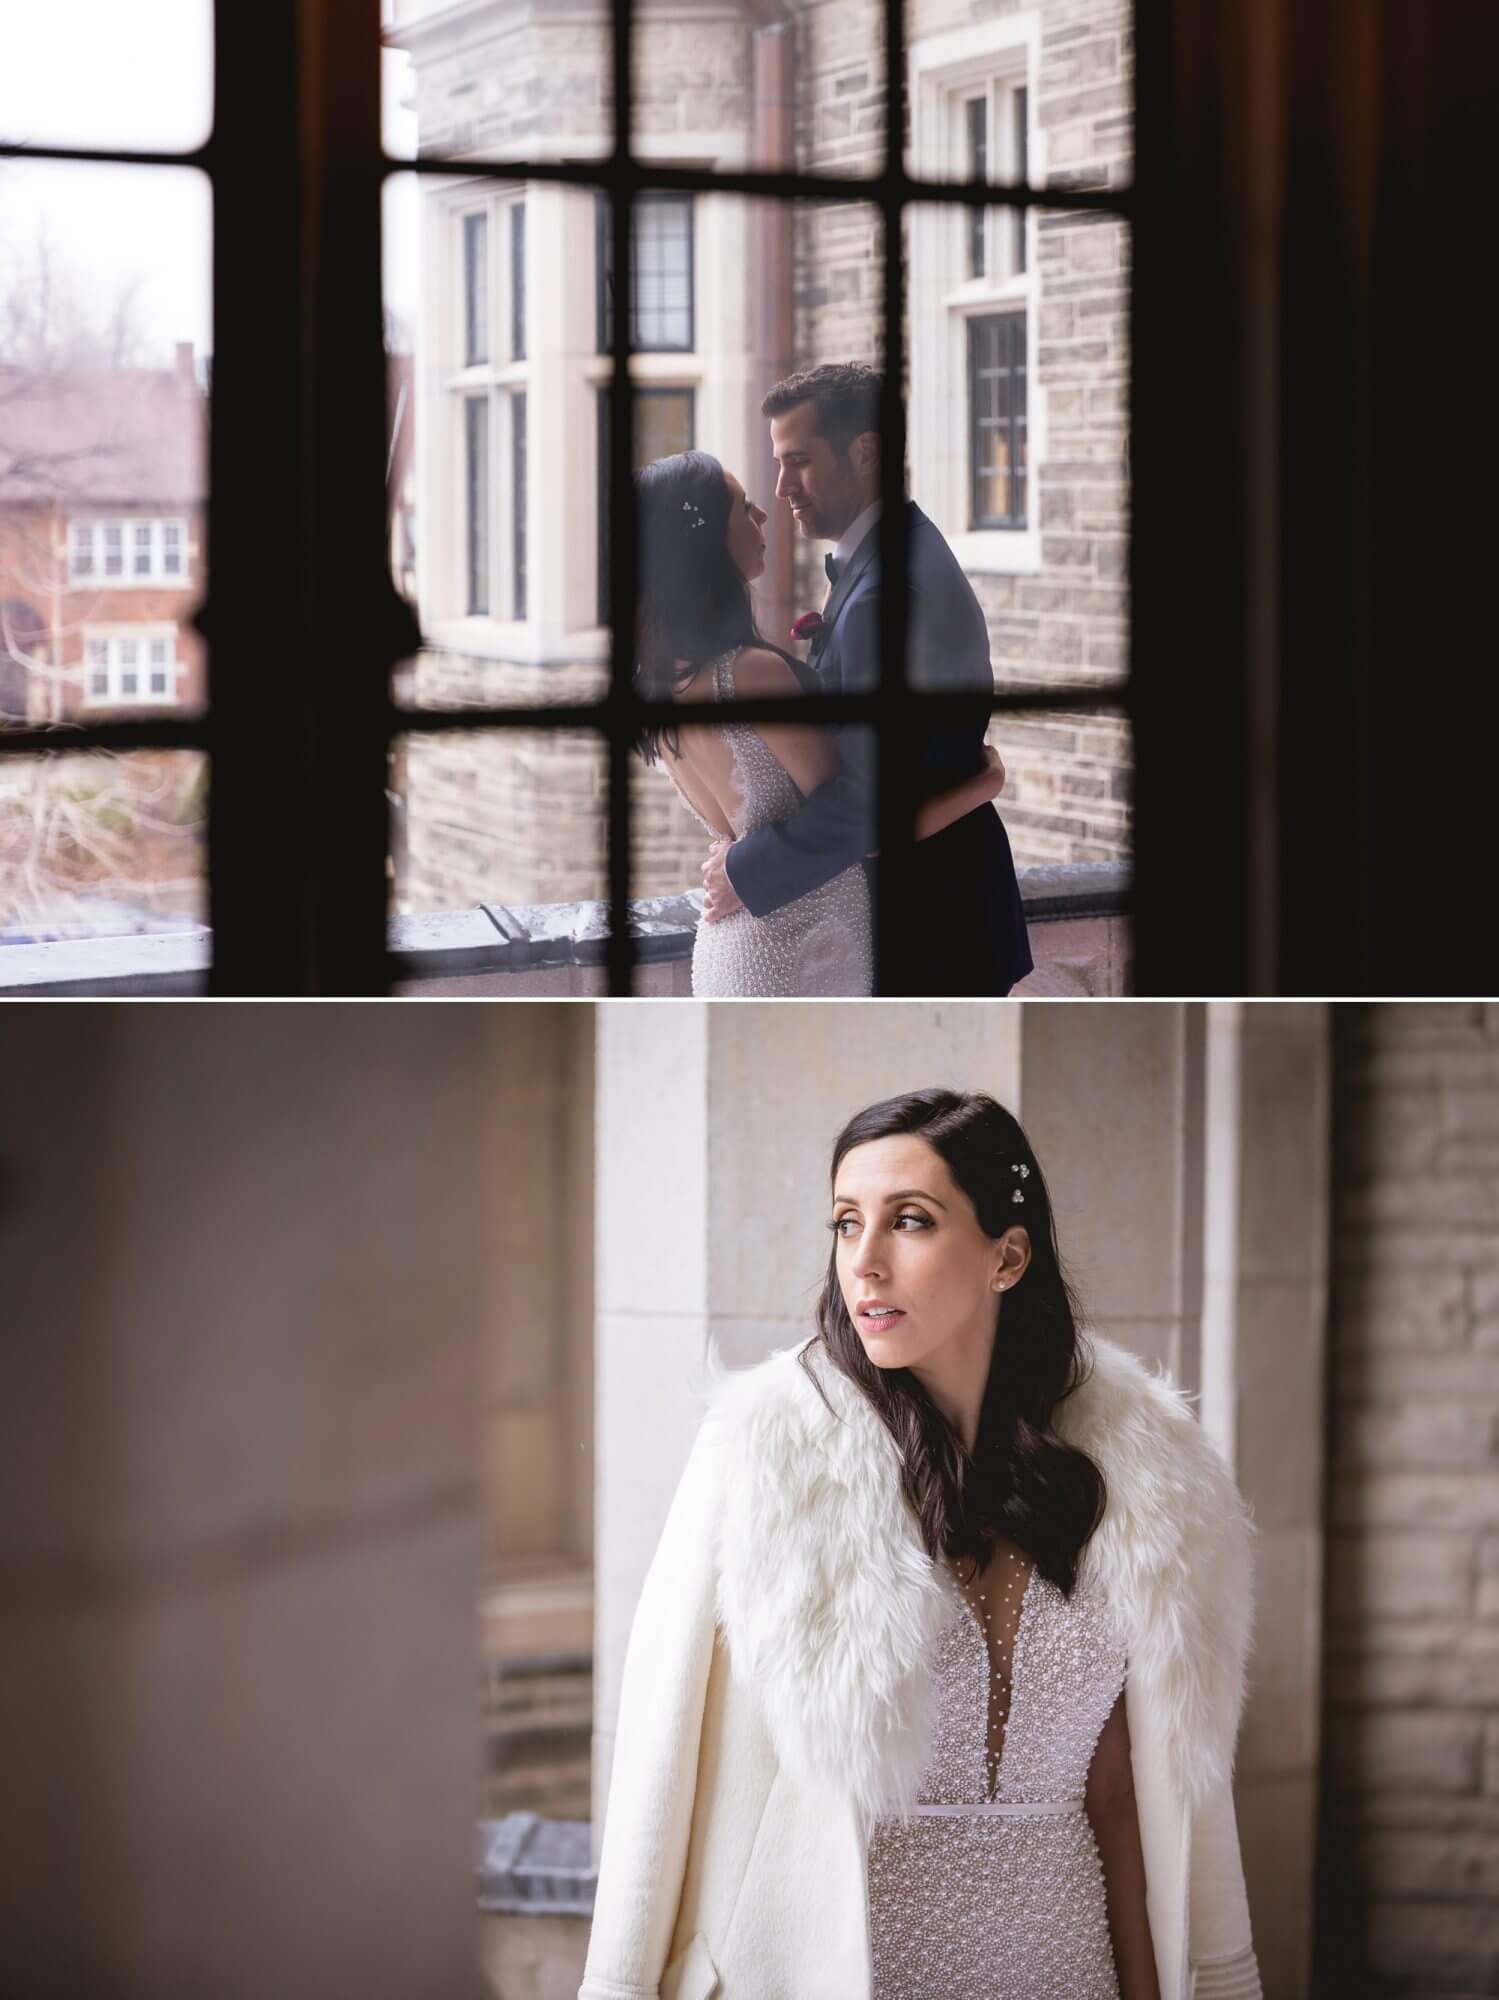 Portrait of the bride and groom through a window at Casa Loma in Toronto